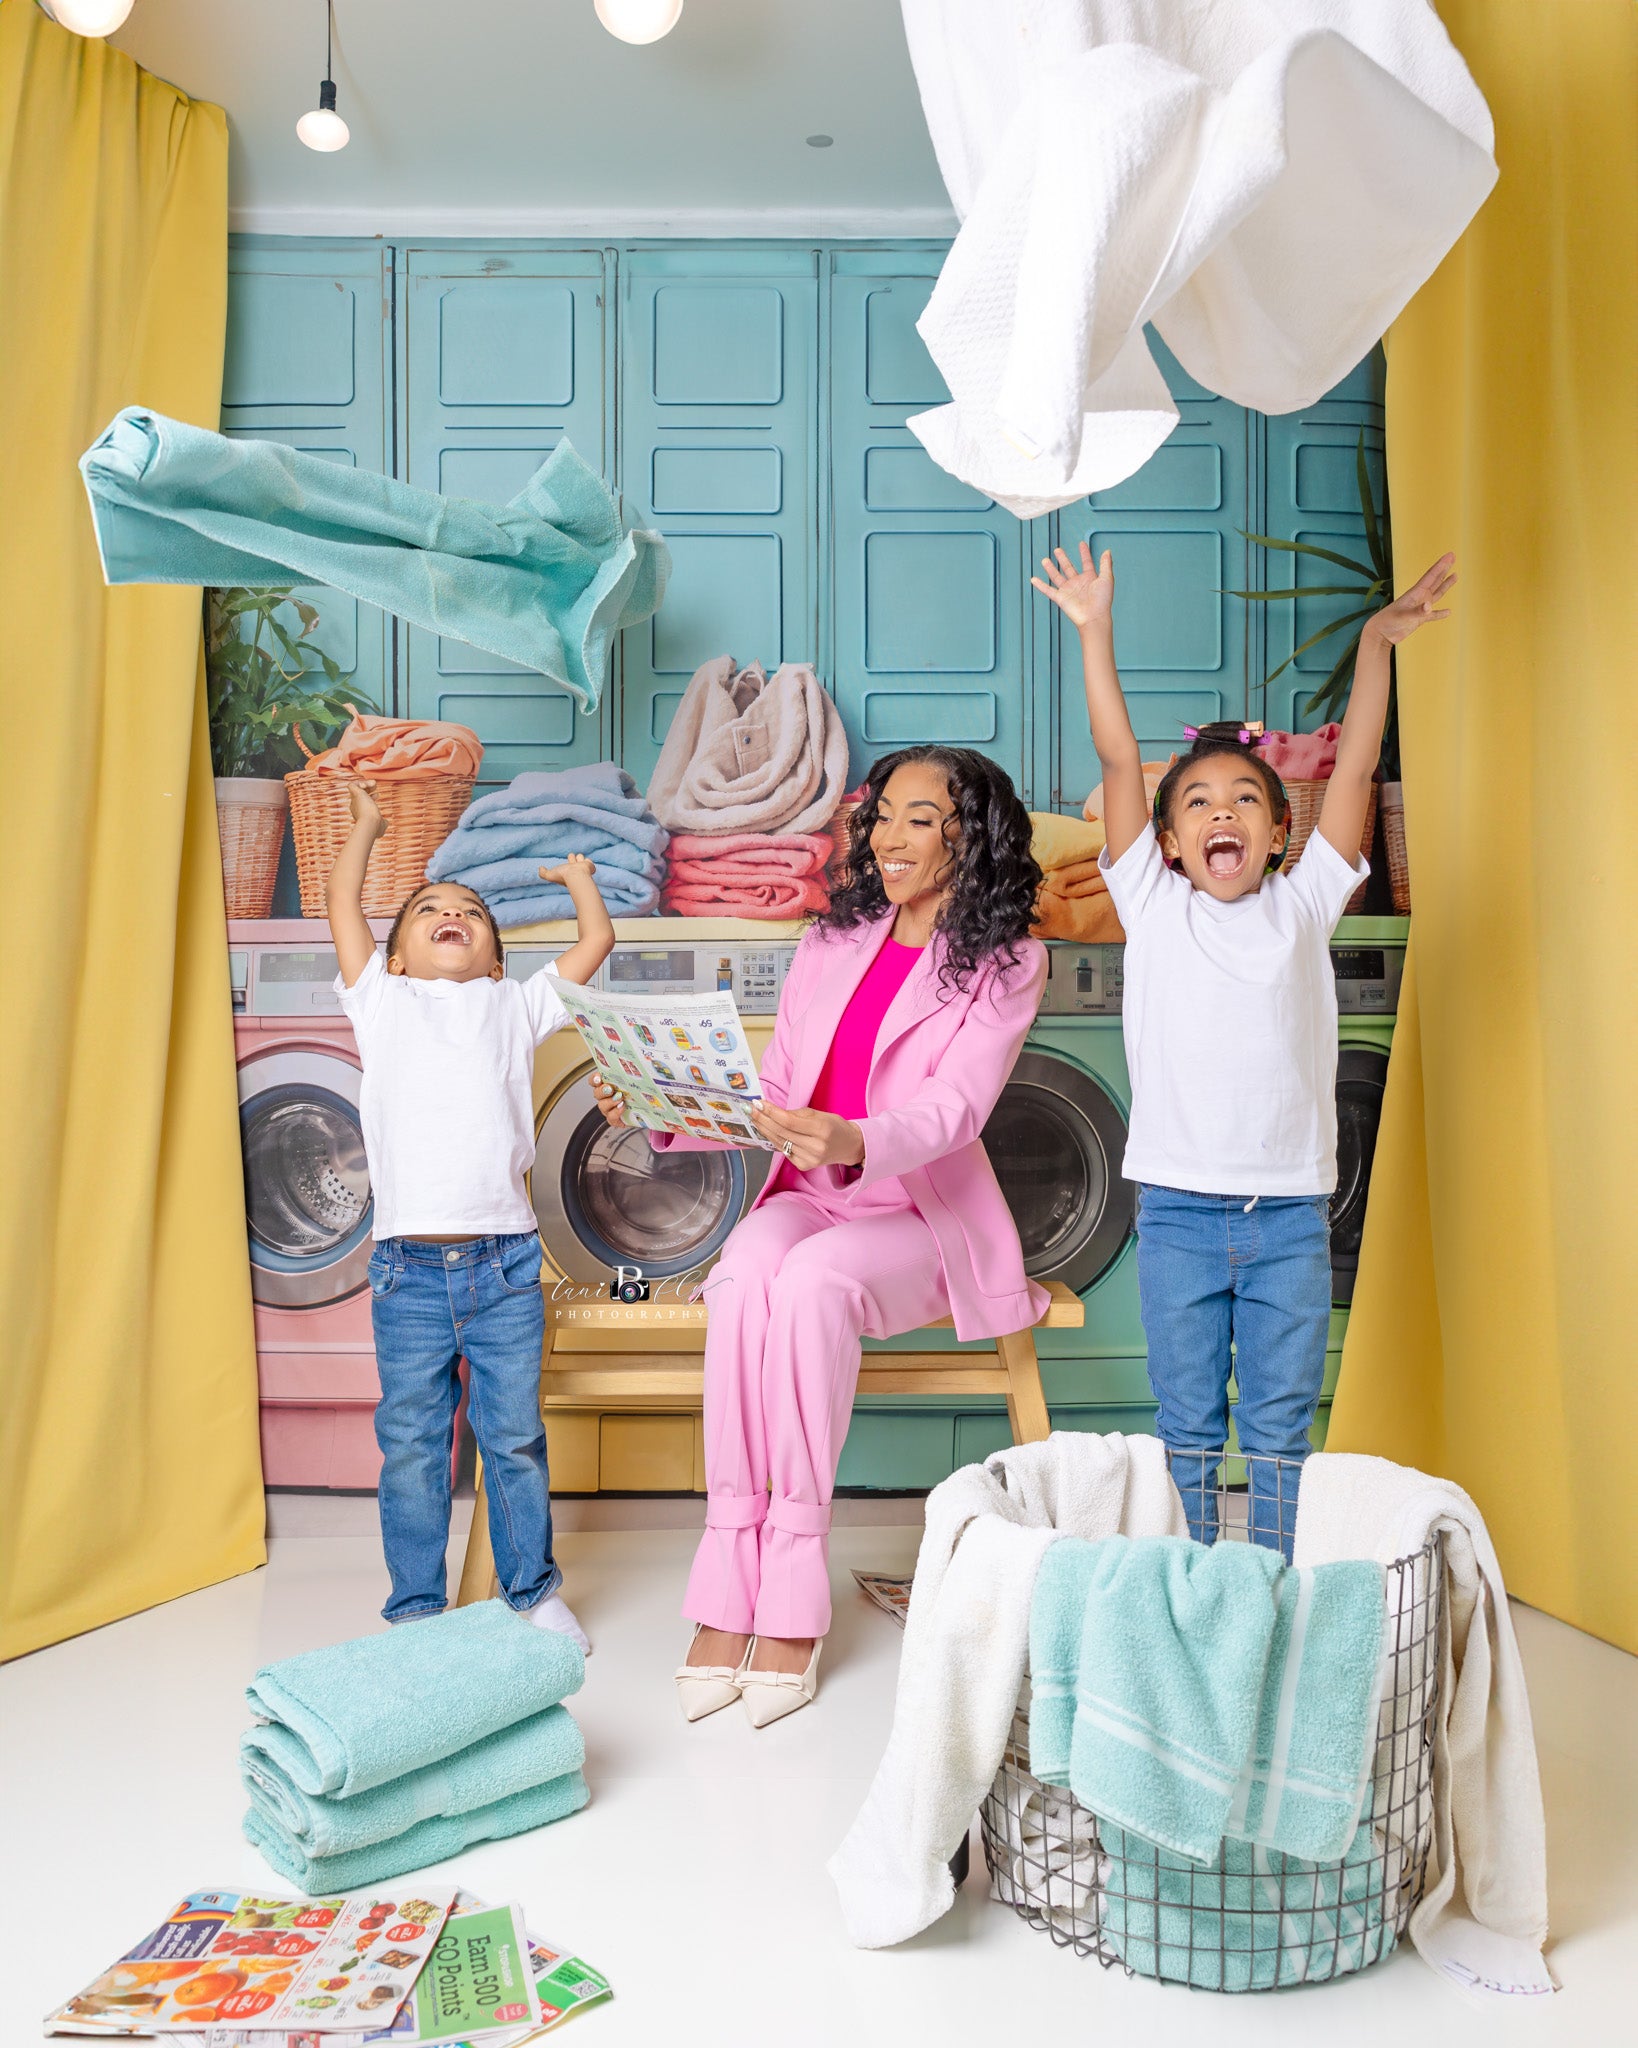 Cheering mother and kids in front of washing machine backdrop